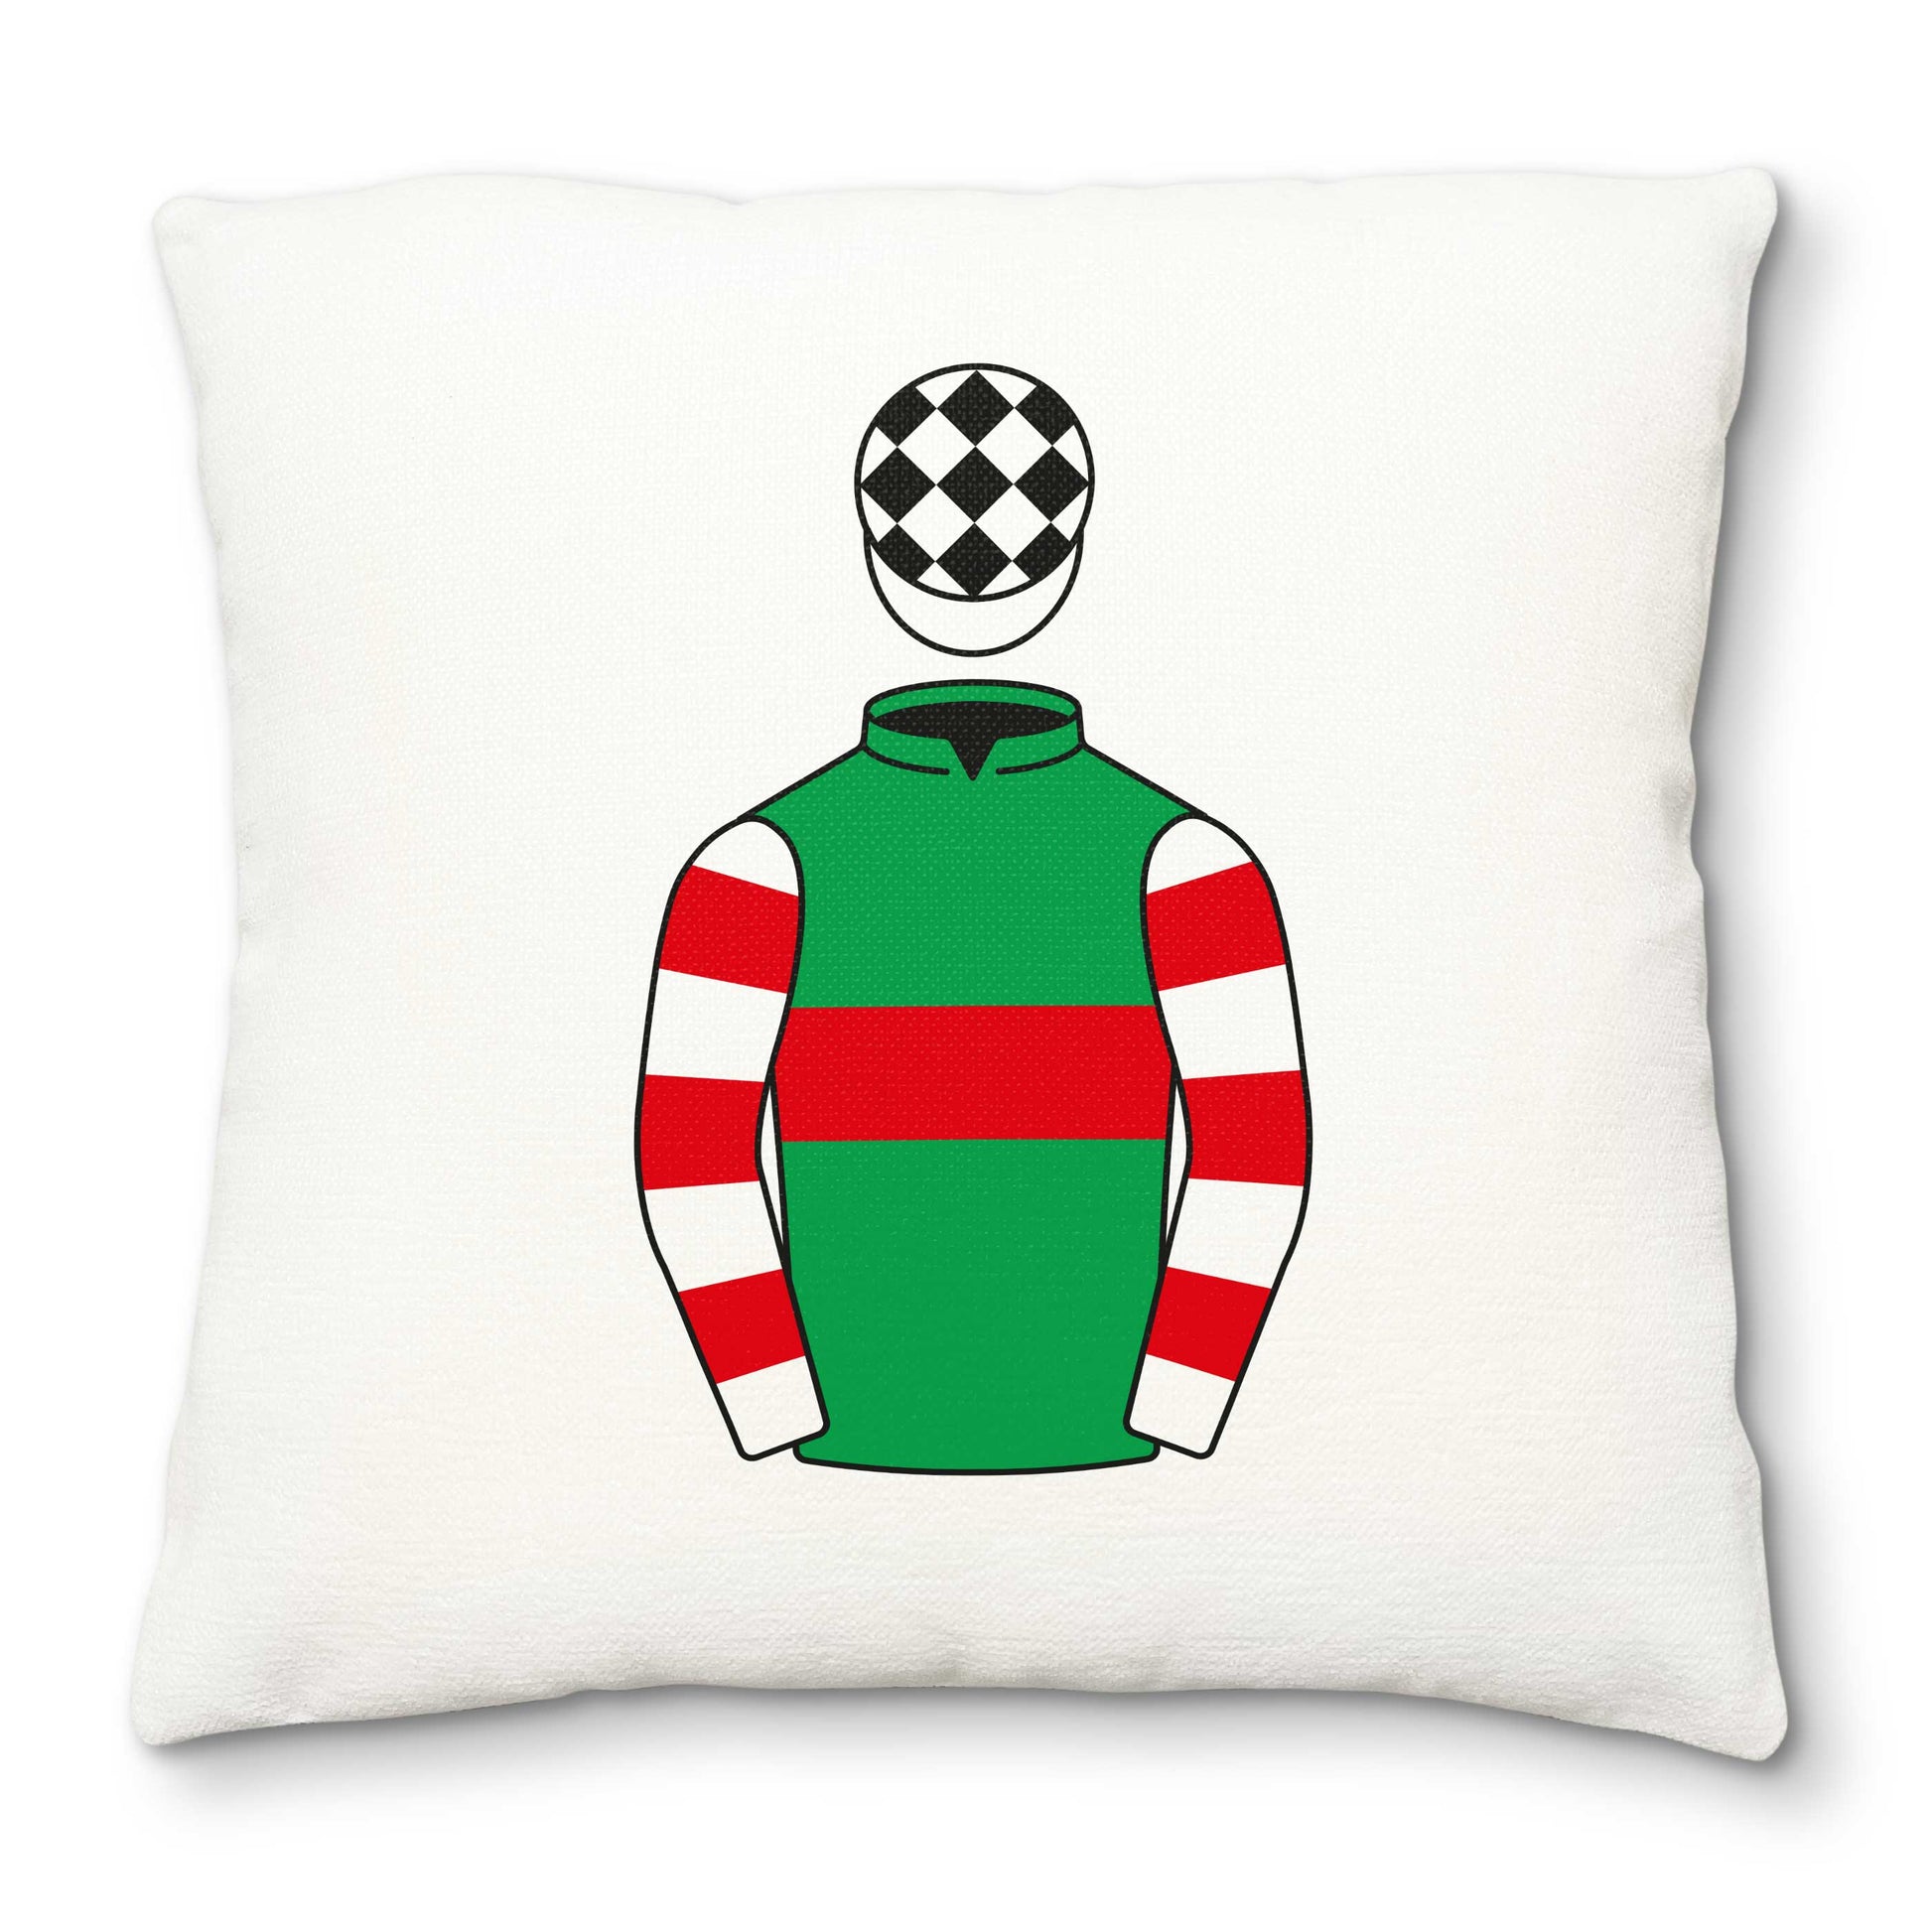 Vivian Healy Deluxe Cushion Cover - Hacked Up